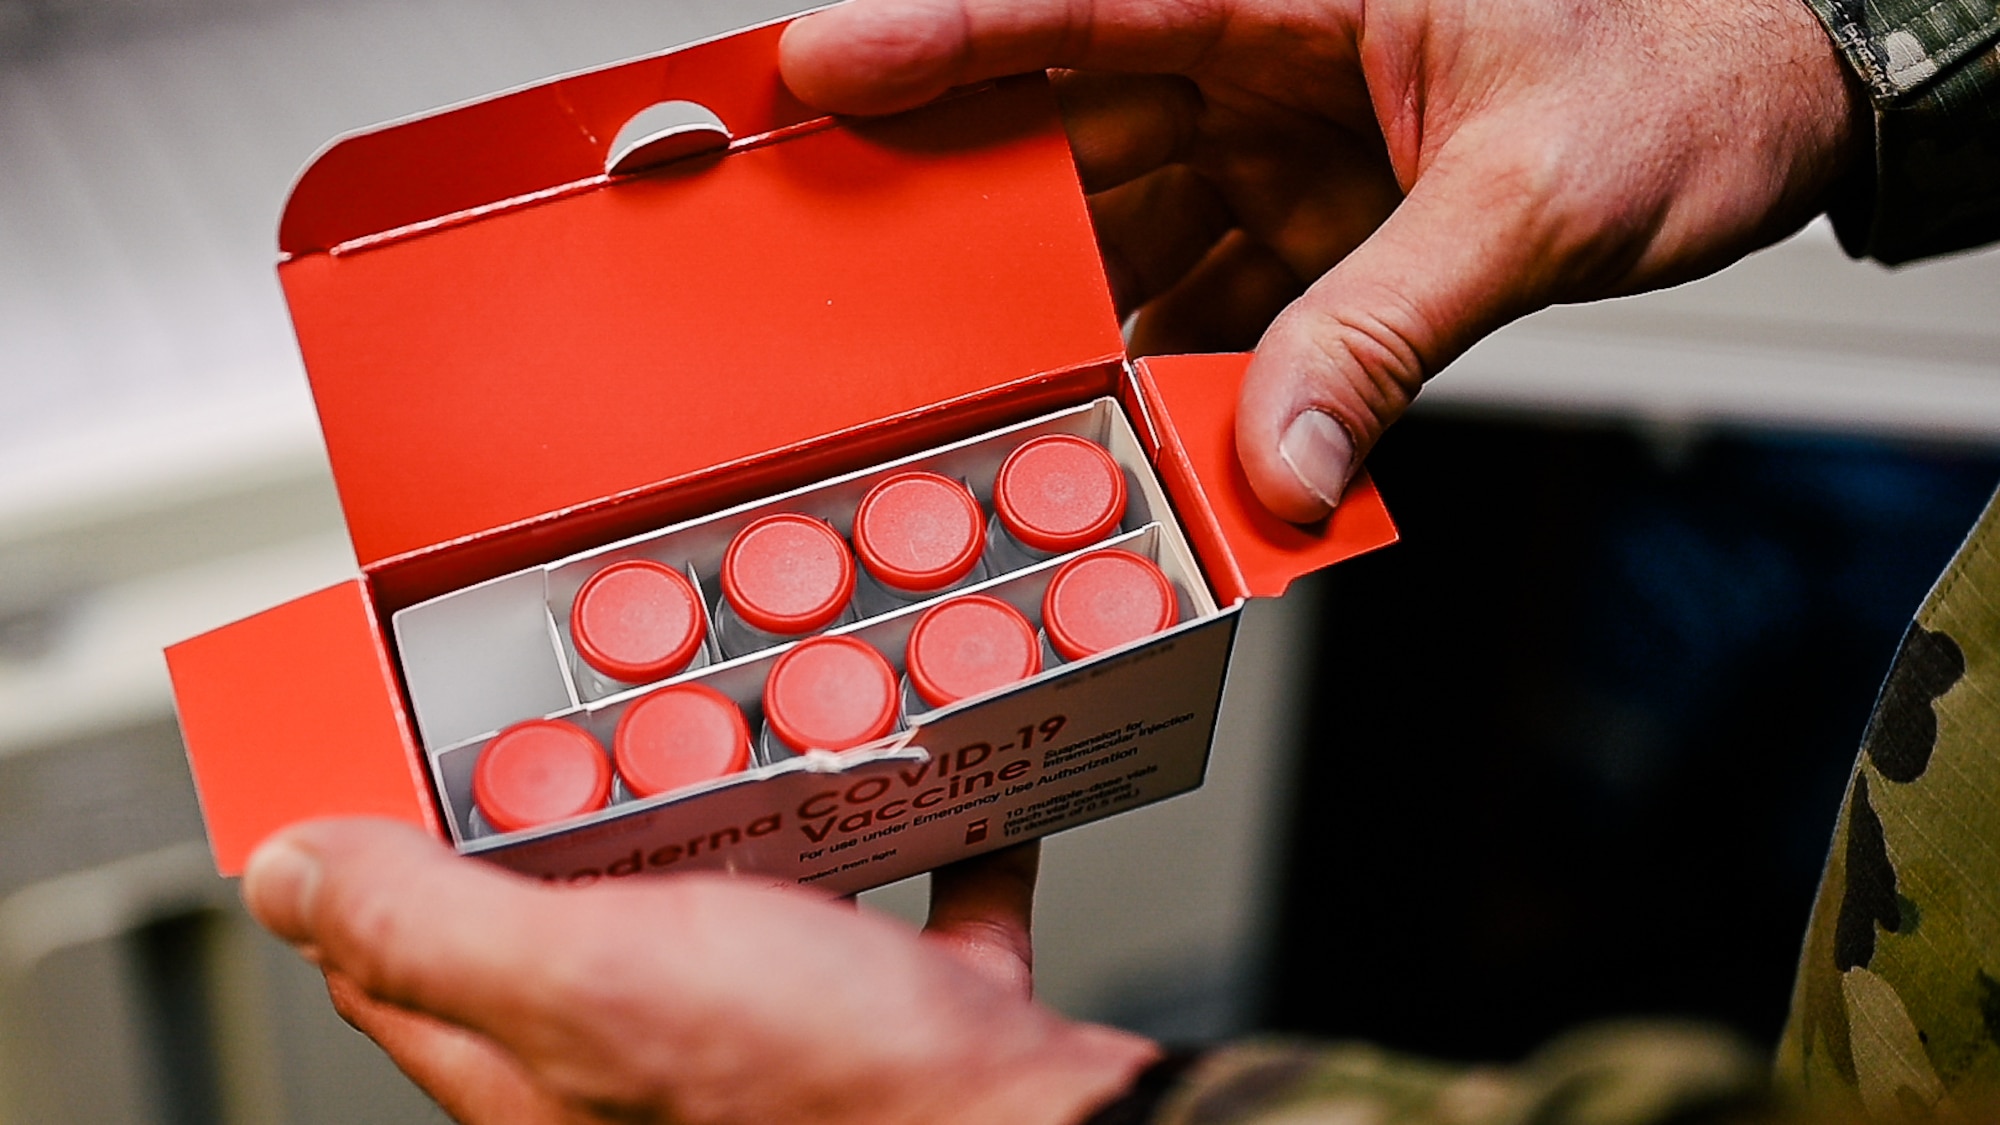 Multiples doses of a COVID-19 vaccine are prepared for initial use on Scott Air Force Base, Ill., Jan. 6, 2021. Scott AFB administered the first three doses of the vaccine to three enlisted Airmen, who are first responders, in accordance with guidance from the Center of Disease Control and the Department of Defense. (U.S. Air Force photo by Tech. Sgt. Jordan Castelan)